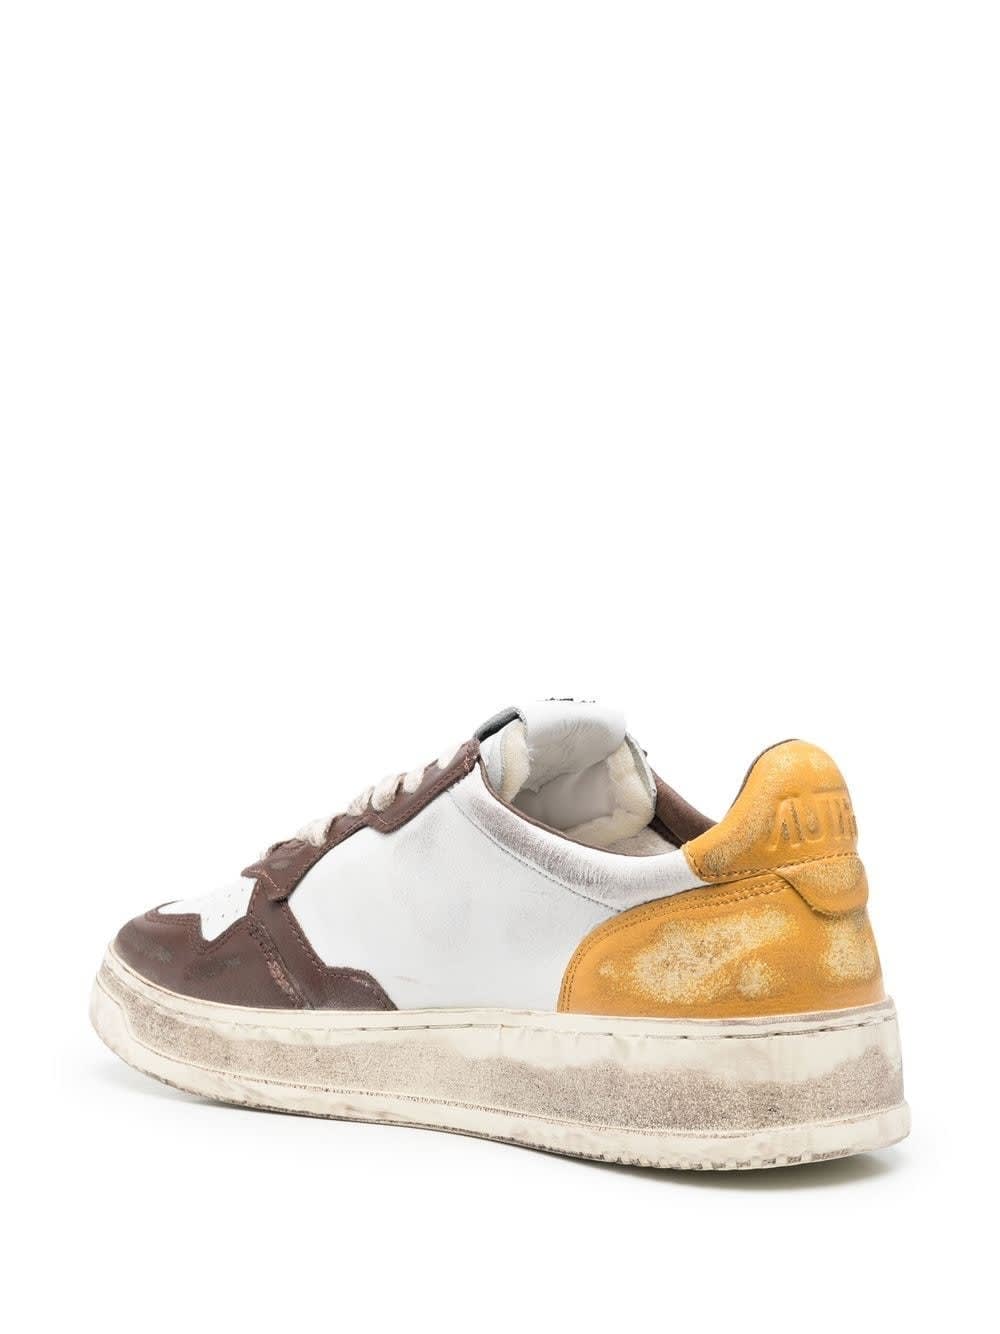 Shop Autry Super Vintage Medalist Low Sneakers In Honey, Brown And White Leather